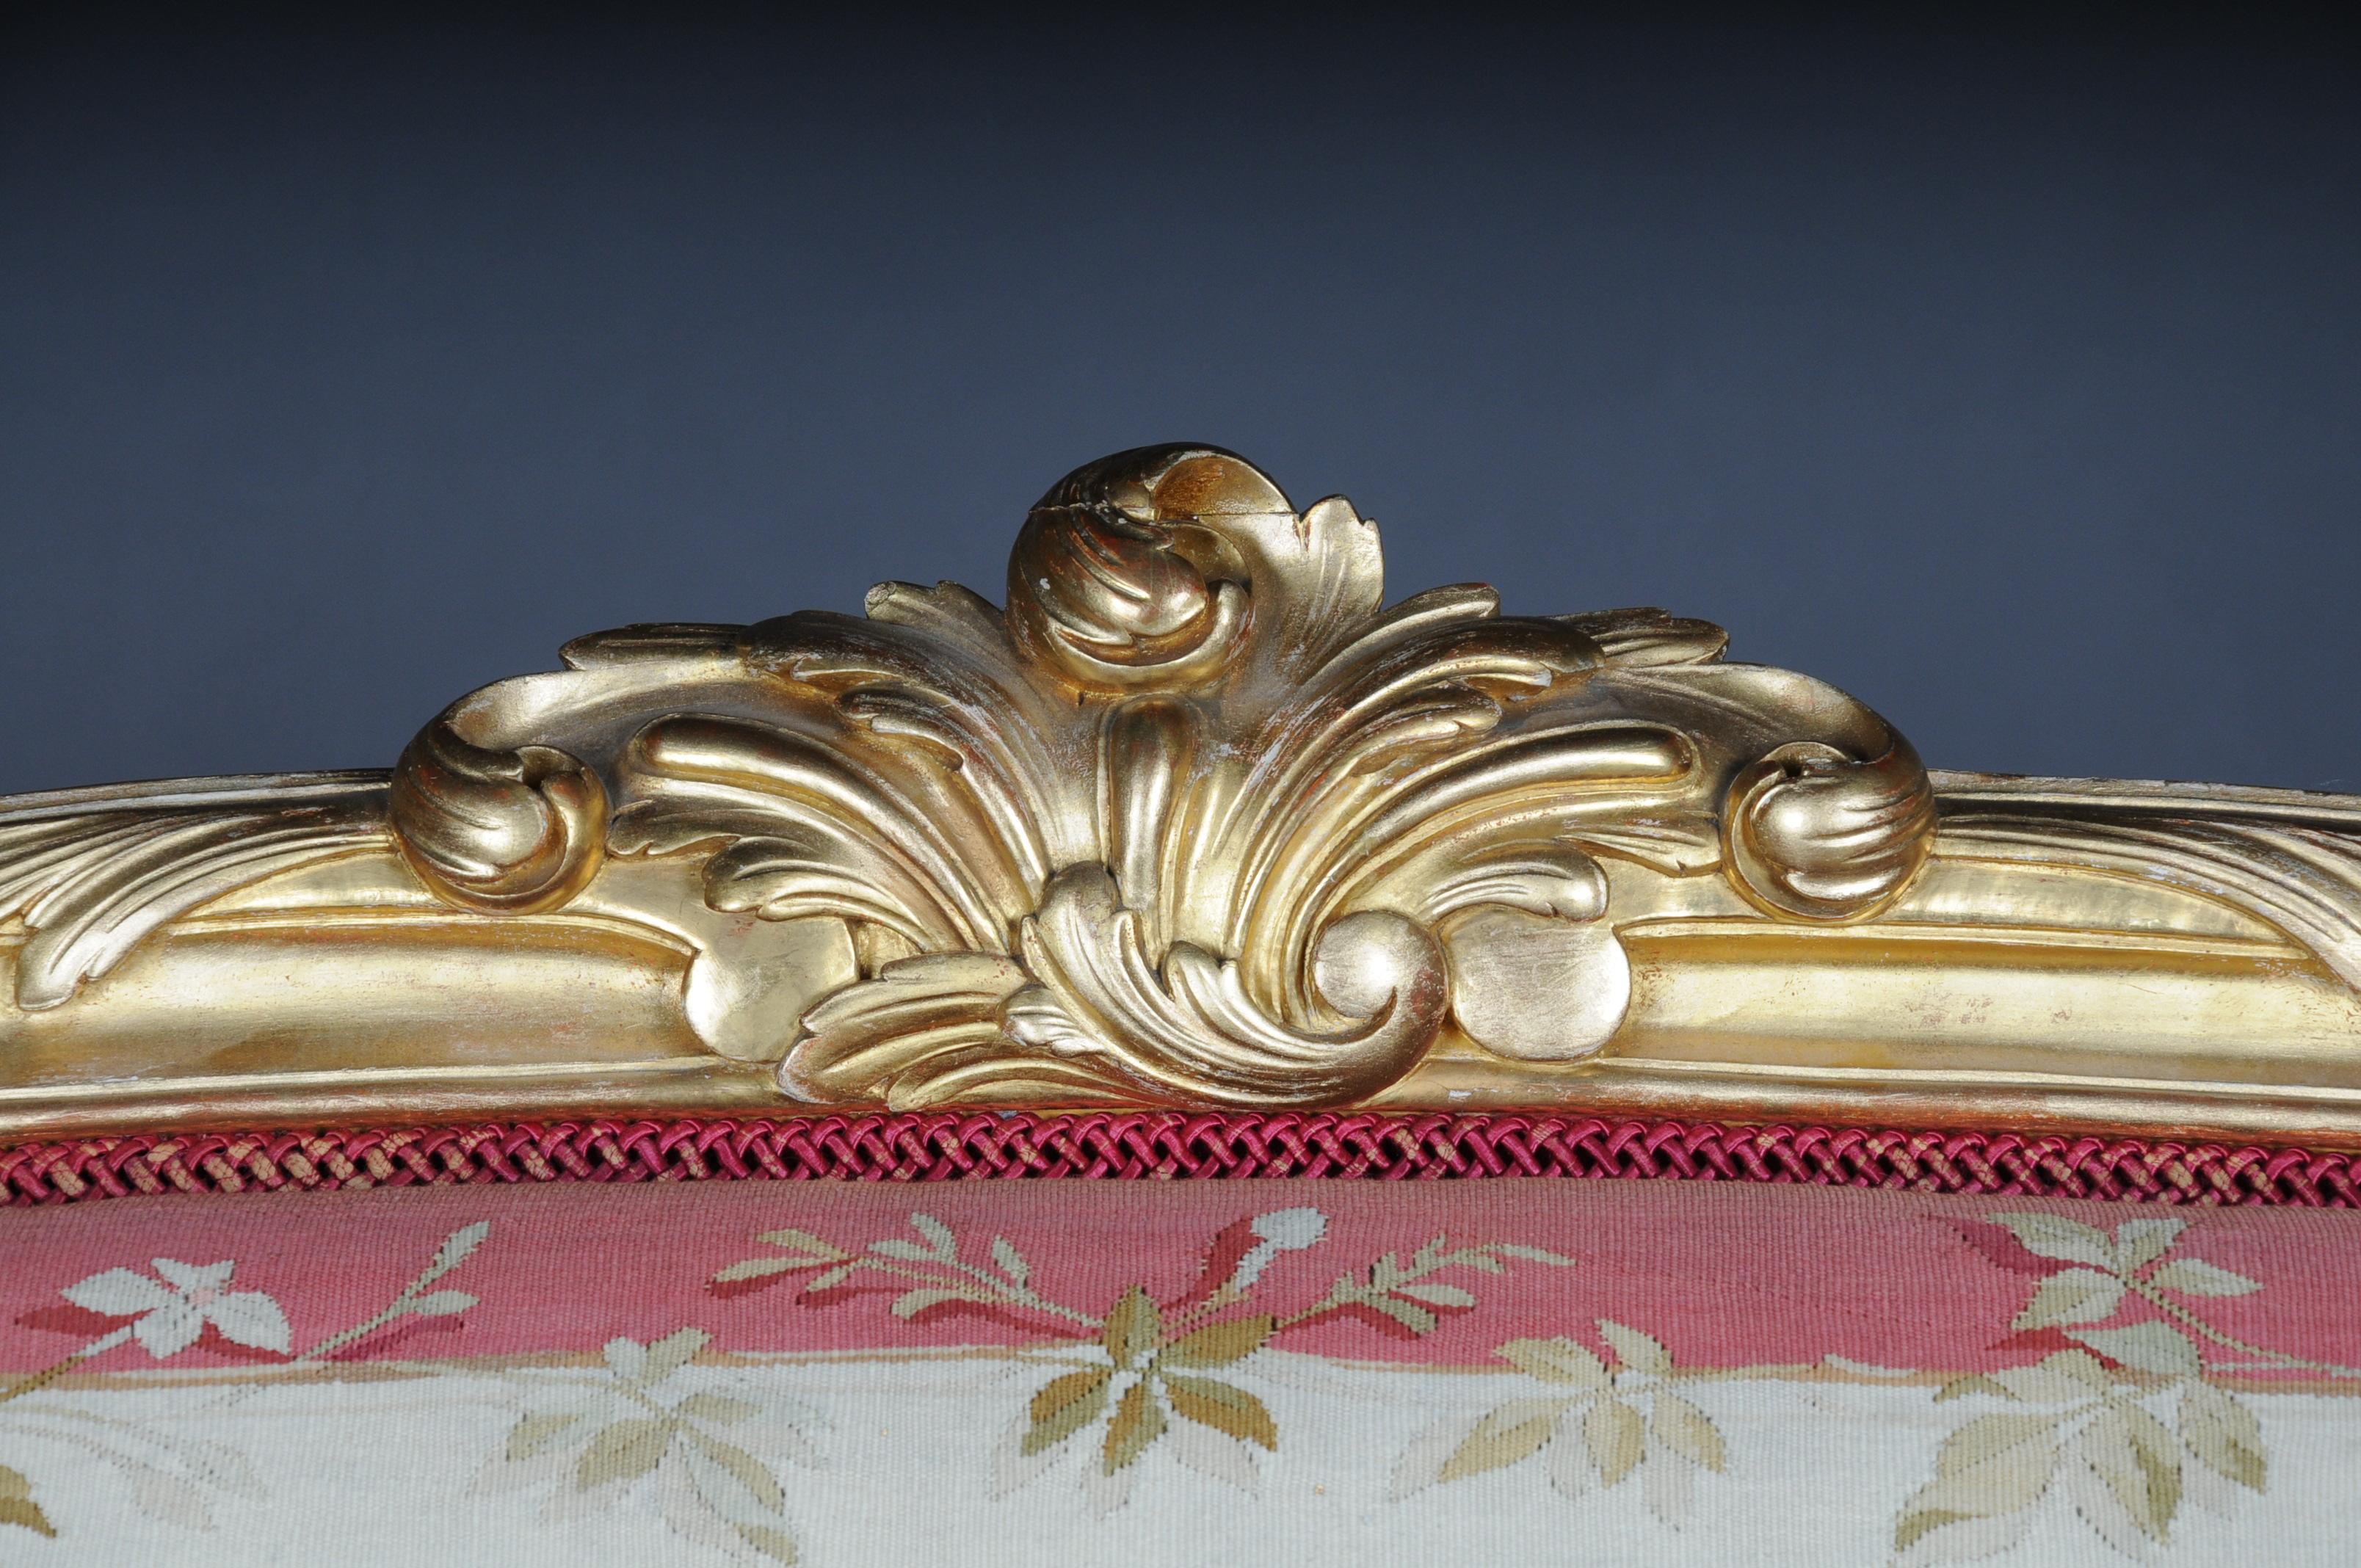 19th Century Royal Louis XV or Rococo Tapestry Sofa and Chairs, Gold, Napoleon III, 1880 For Sale